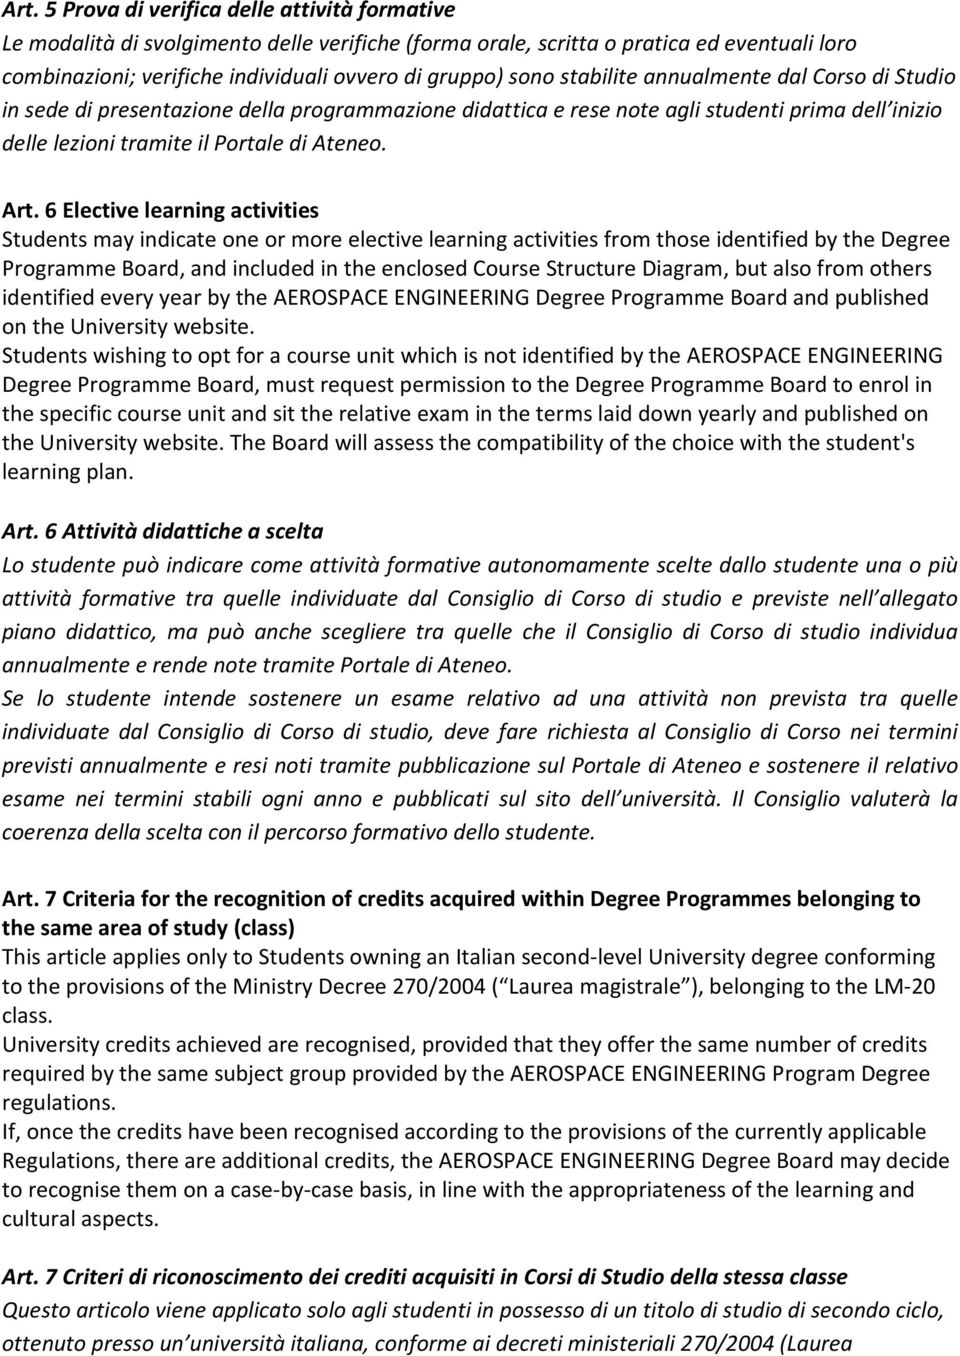 6 Elective learning activities Students may indicate one or more elective learning activities from those identified by the Degree Programme Board, and included in the enclosed Course Structure